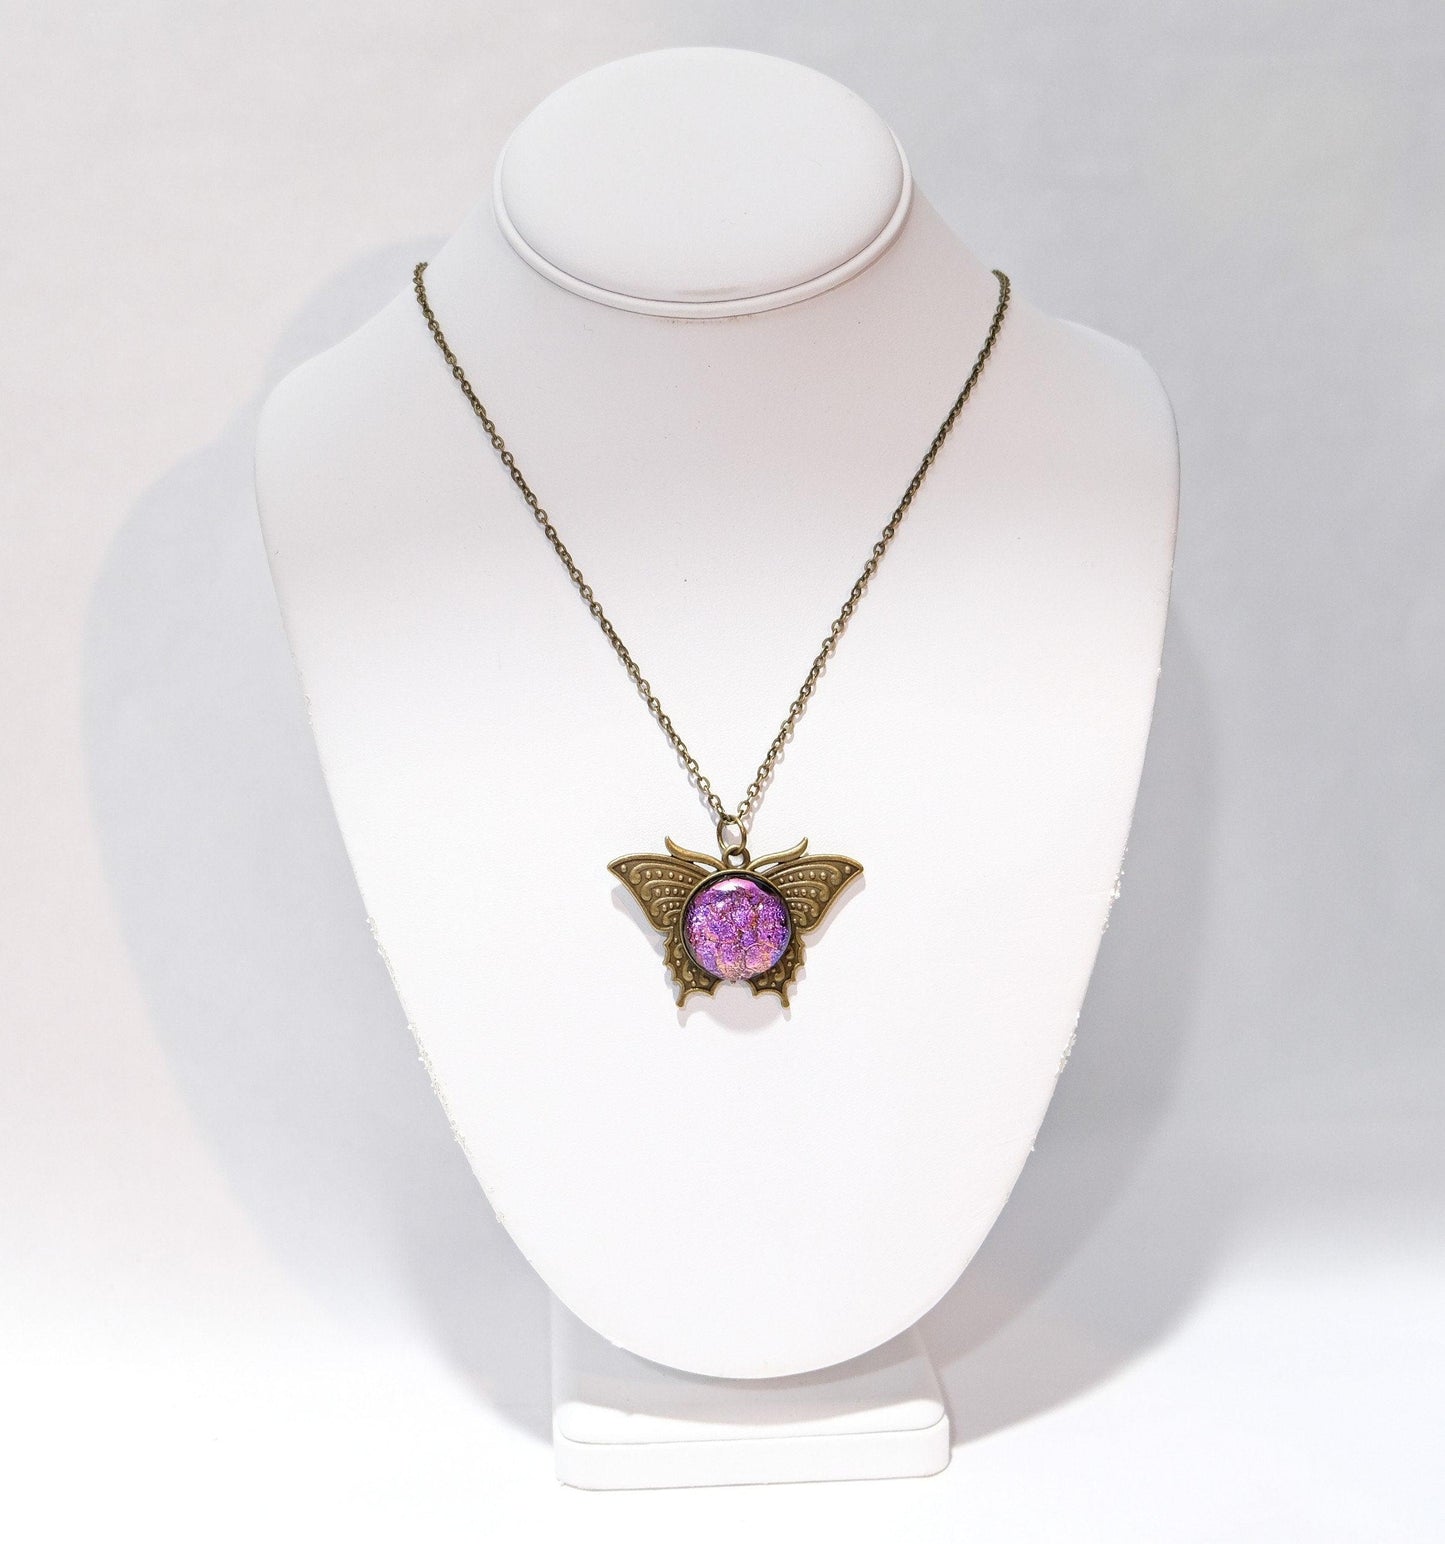 Butterfly pendant necklace, brass tone with dark purple dichroic fused glass center stone on a 20 inch brass tone chain seeds glassworks seedsglassworks